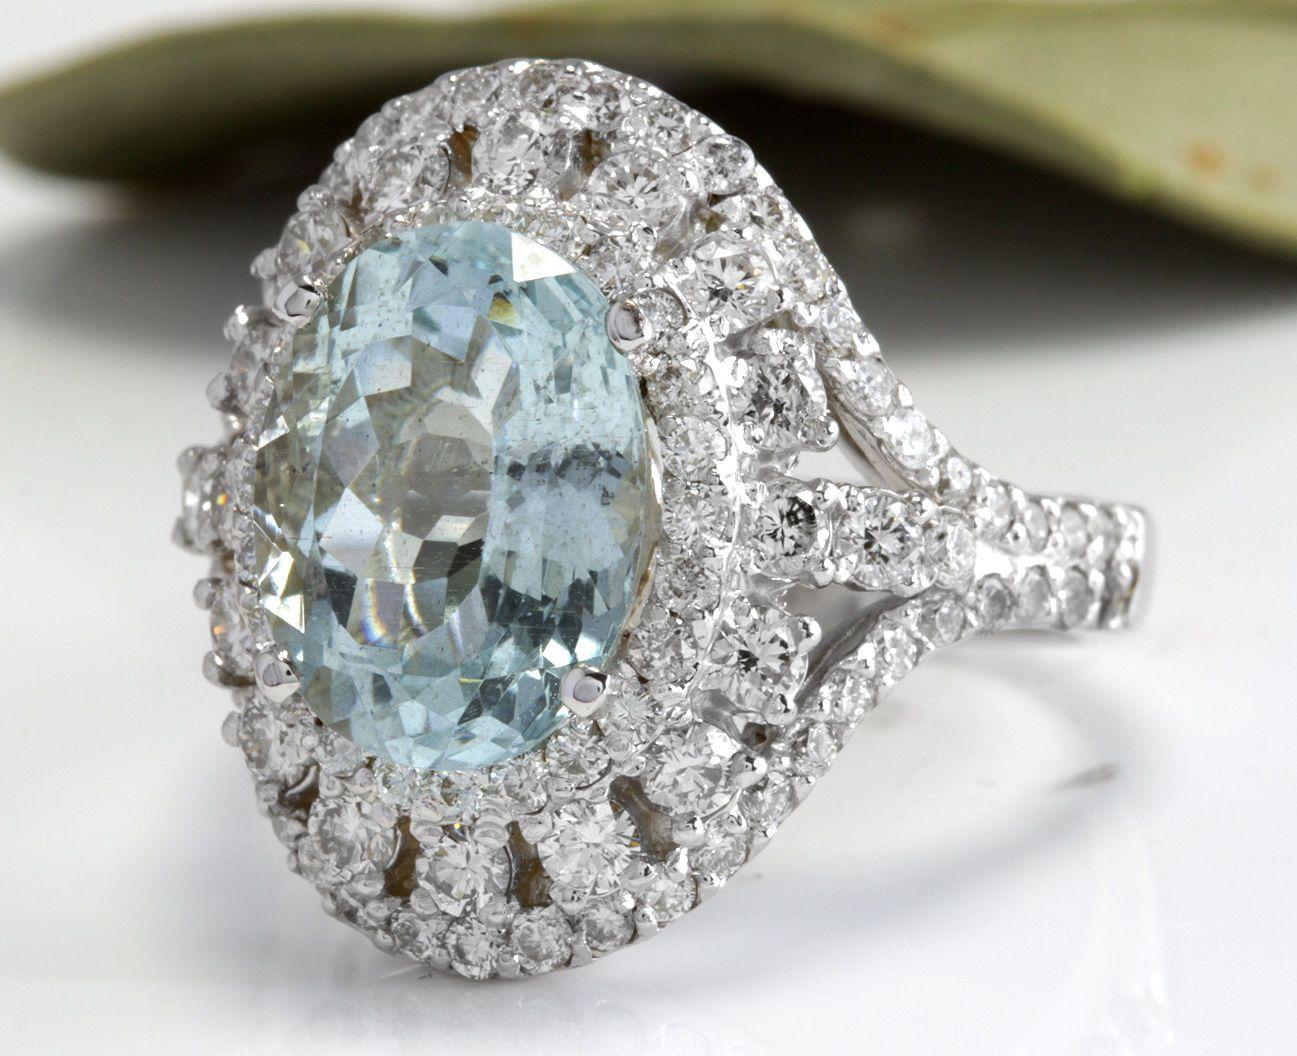 5.85 Carats Natural Aquamarine and Diamond 14K Solid White Gold Ring

Total Natural Oval Cut Aquamarine Weights: 3.60 Carats

Aquamarine Measures: 11.44 x 8.71mm

Natural Round Diamonds Weight: 2.25 Carats (color G / Clarity VS2-SI1)

Ring size: 7